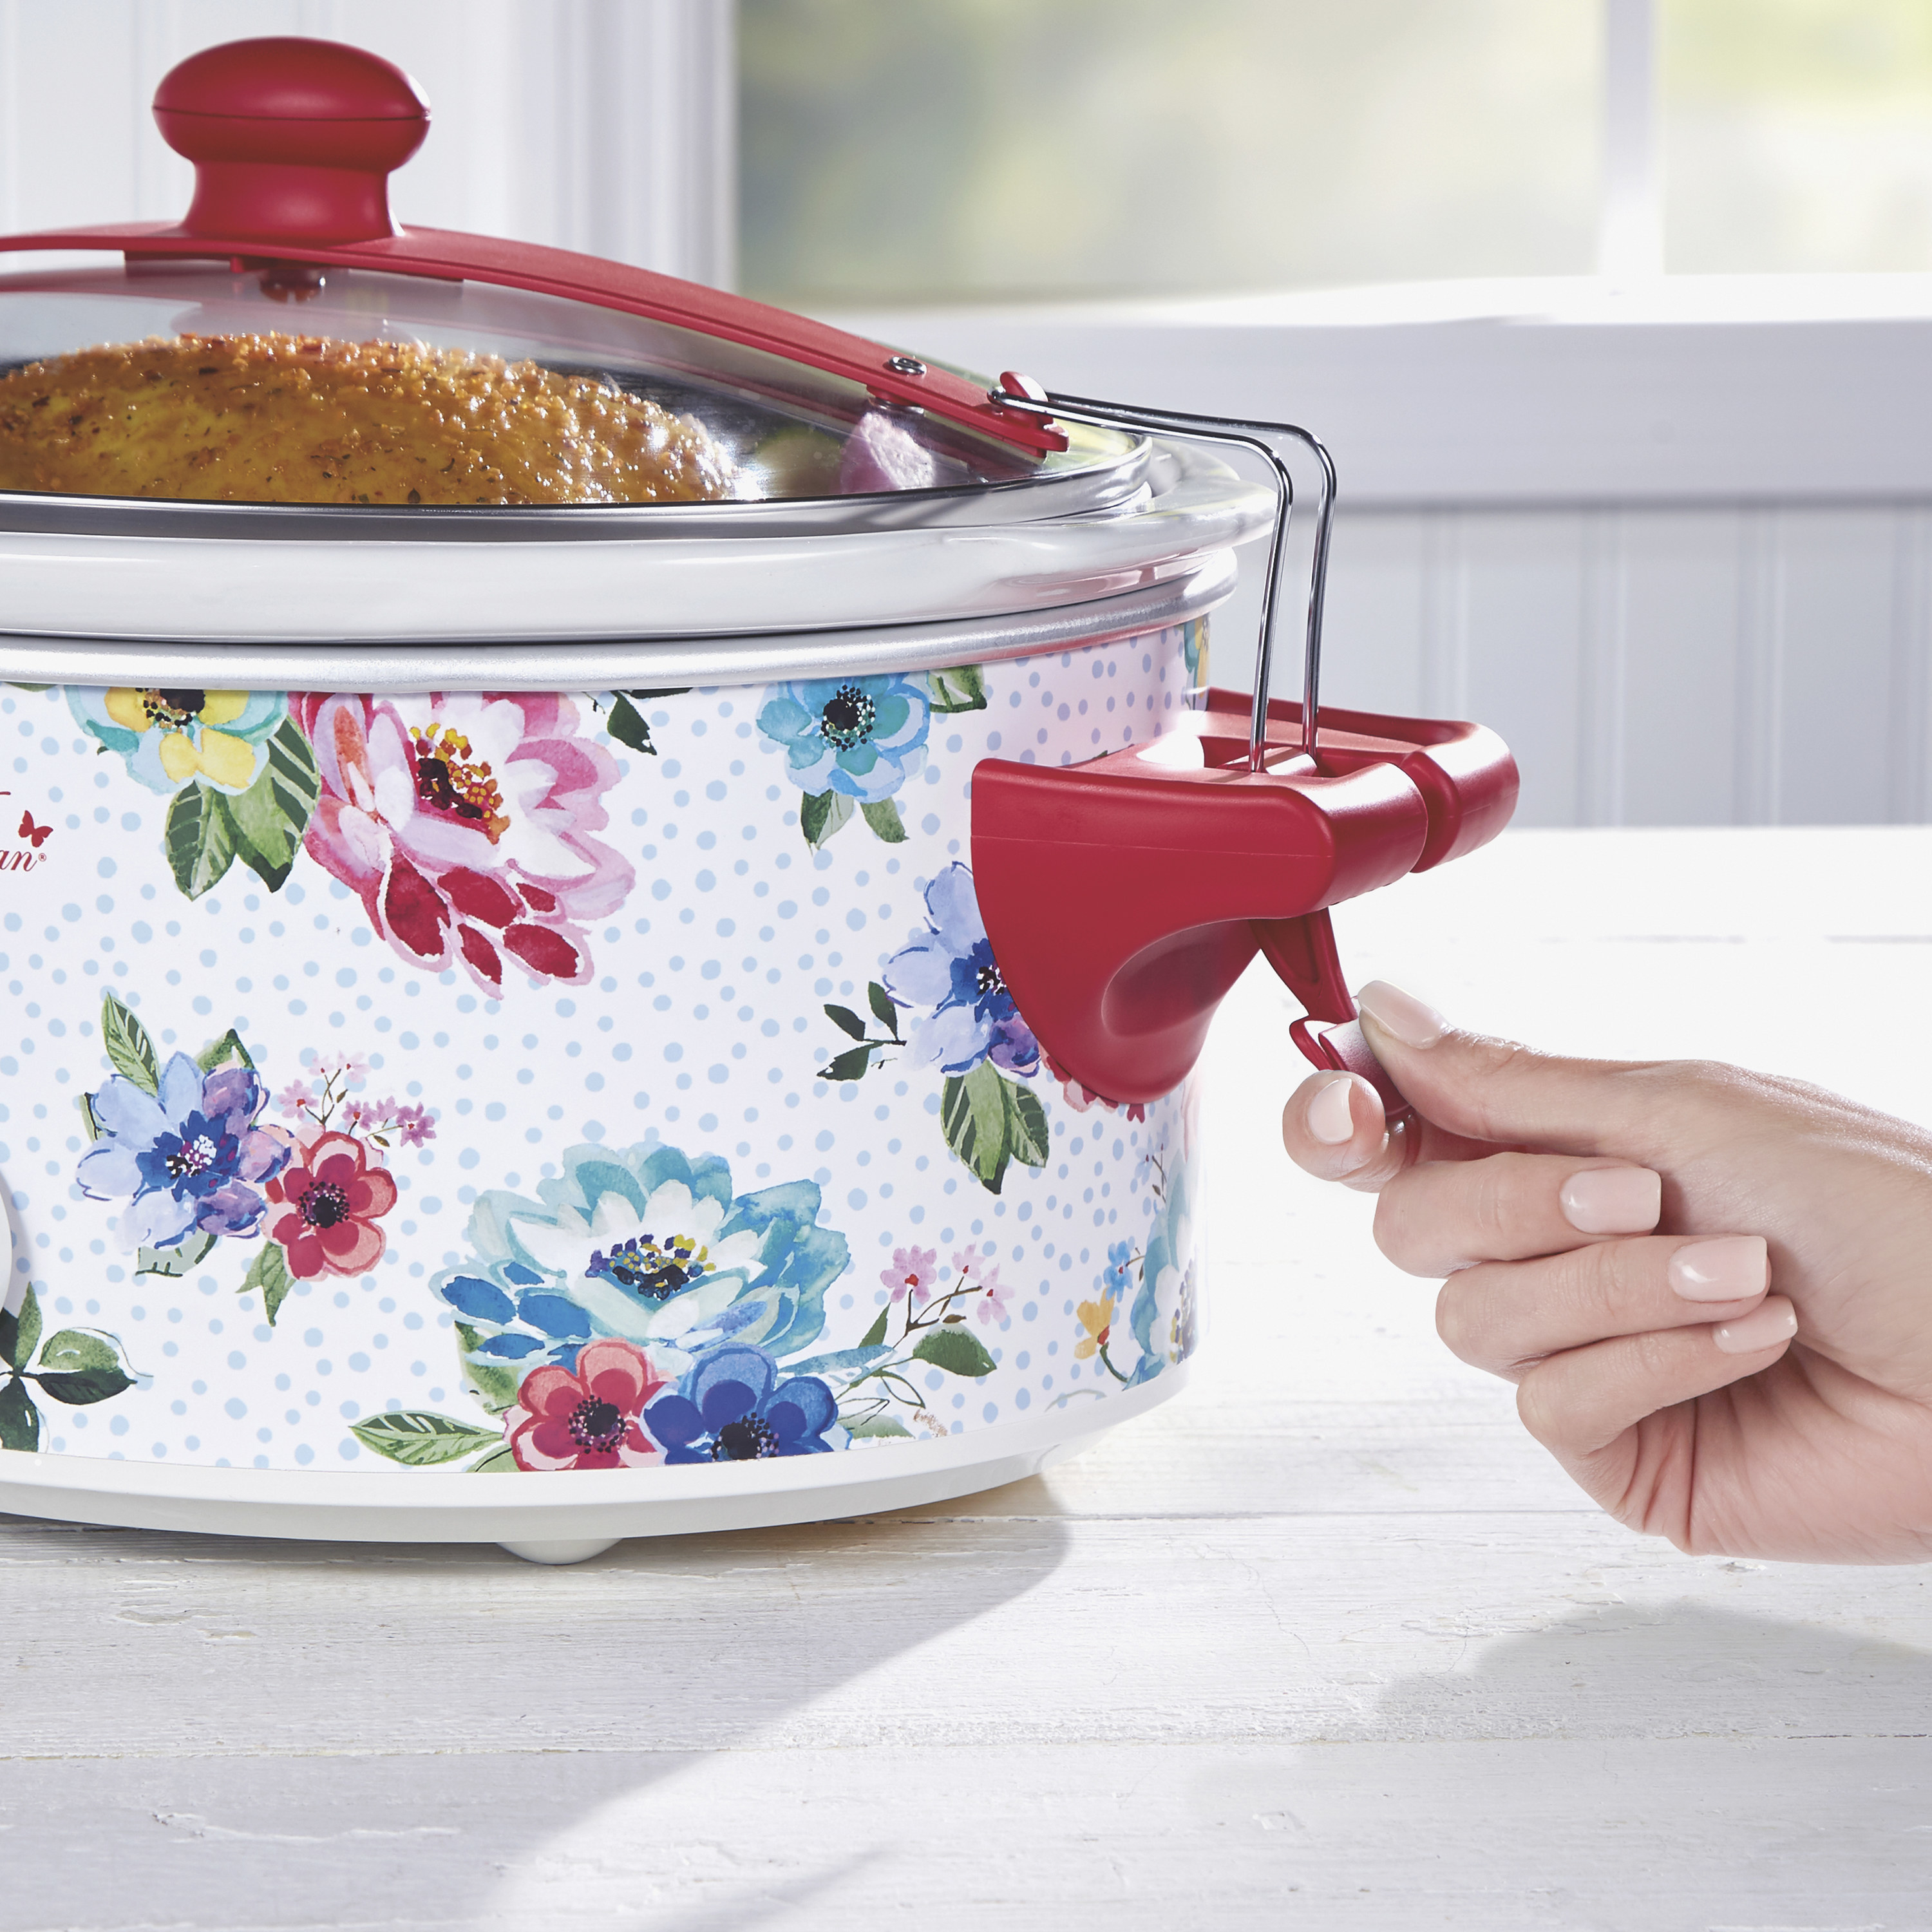 A model demonstrates the clip on the slow cooker, which ahs red and blue flowers on a white background on the side and red clips and handles.